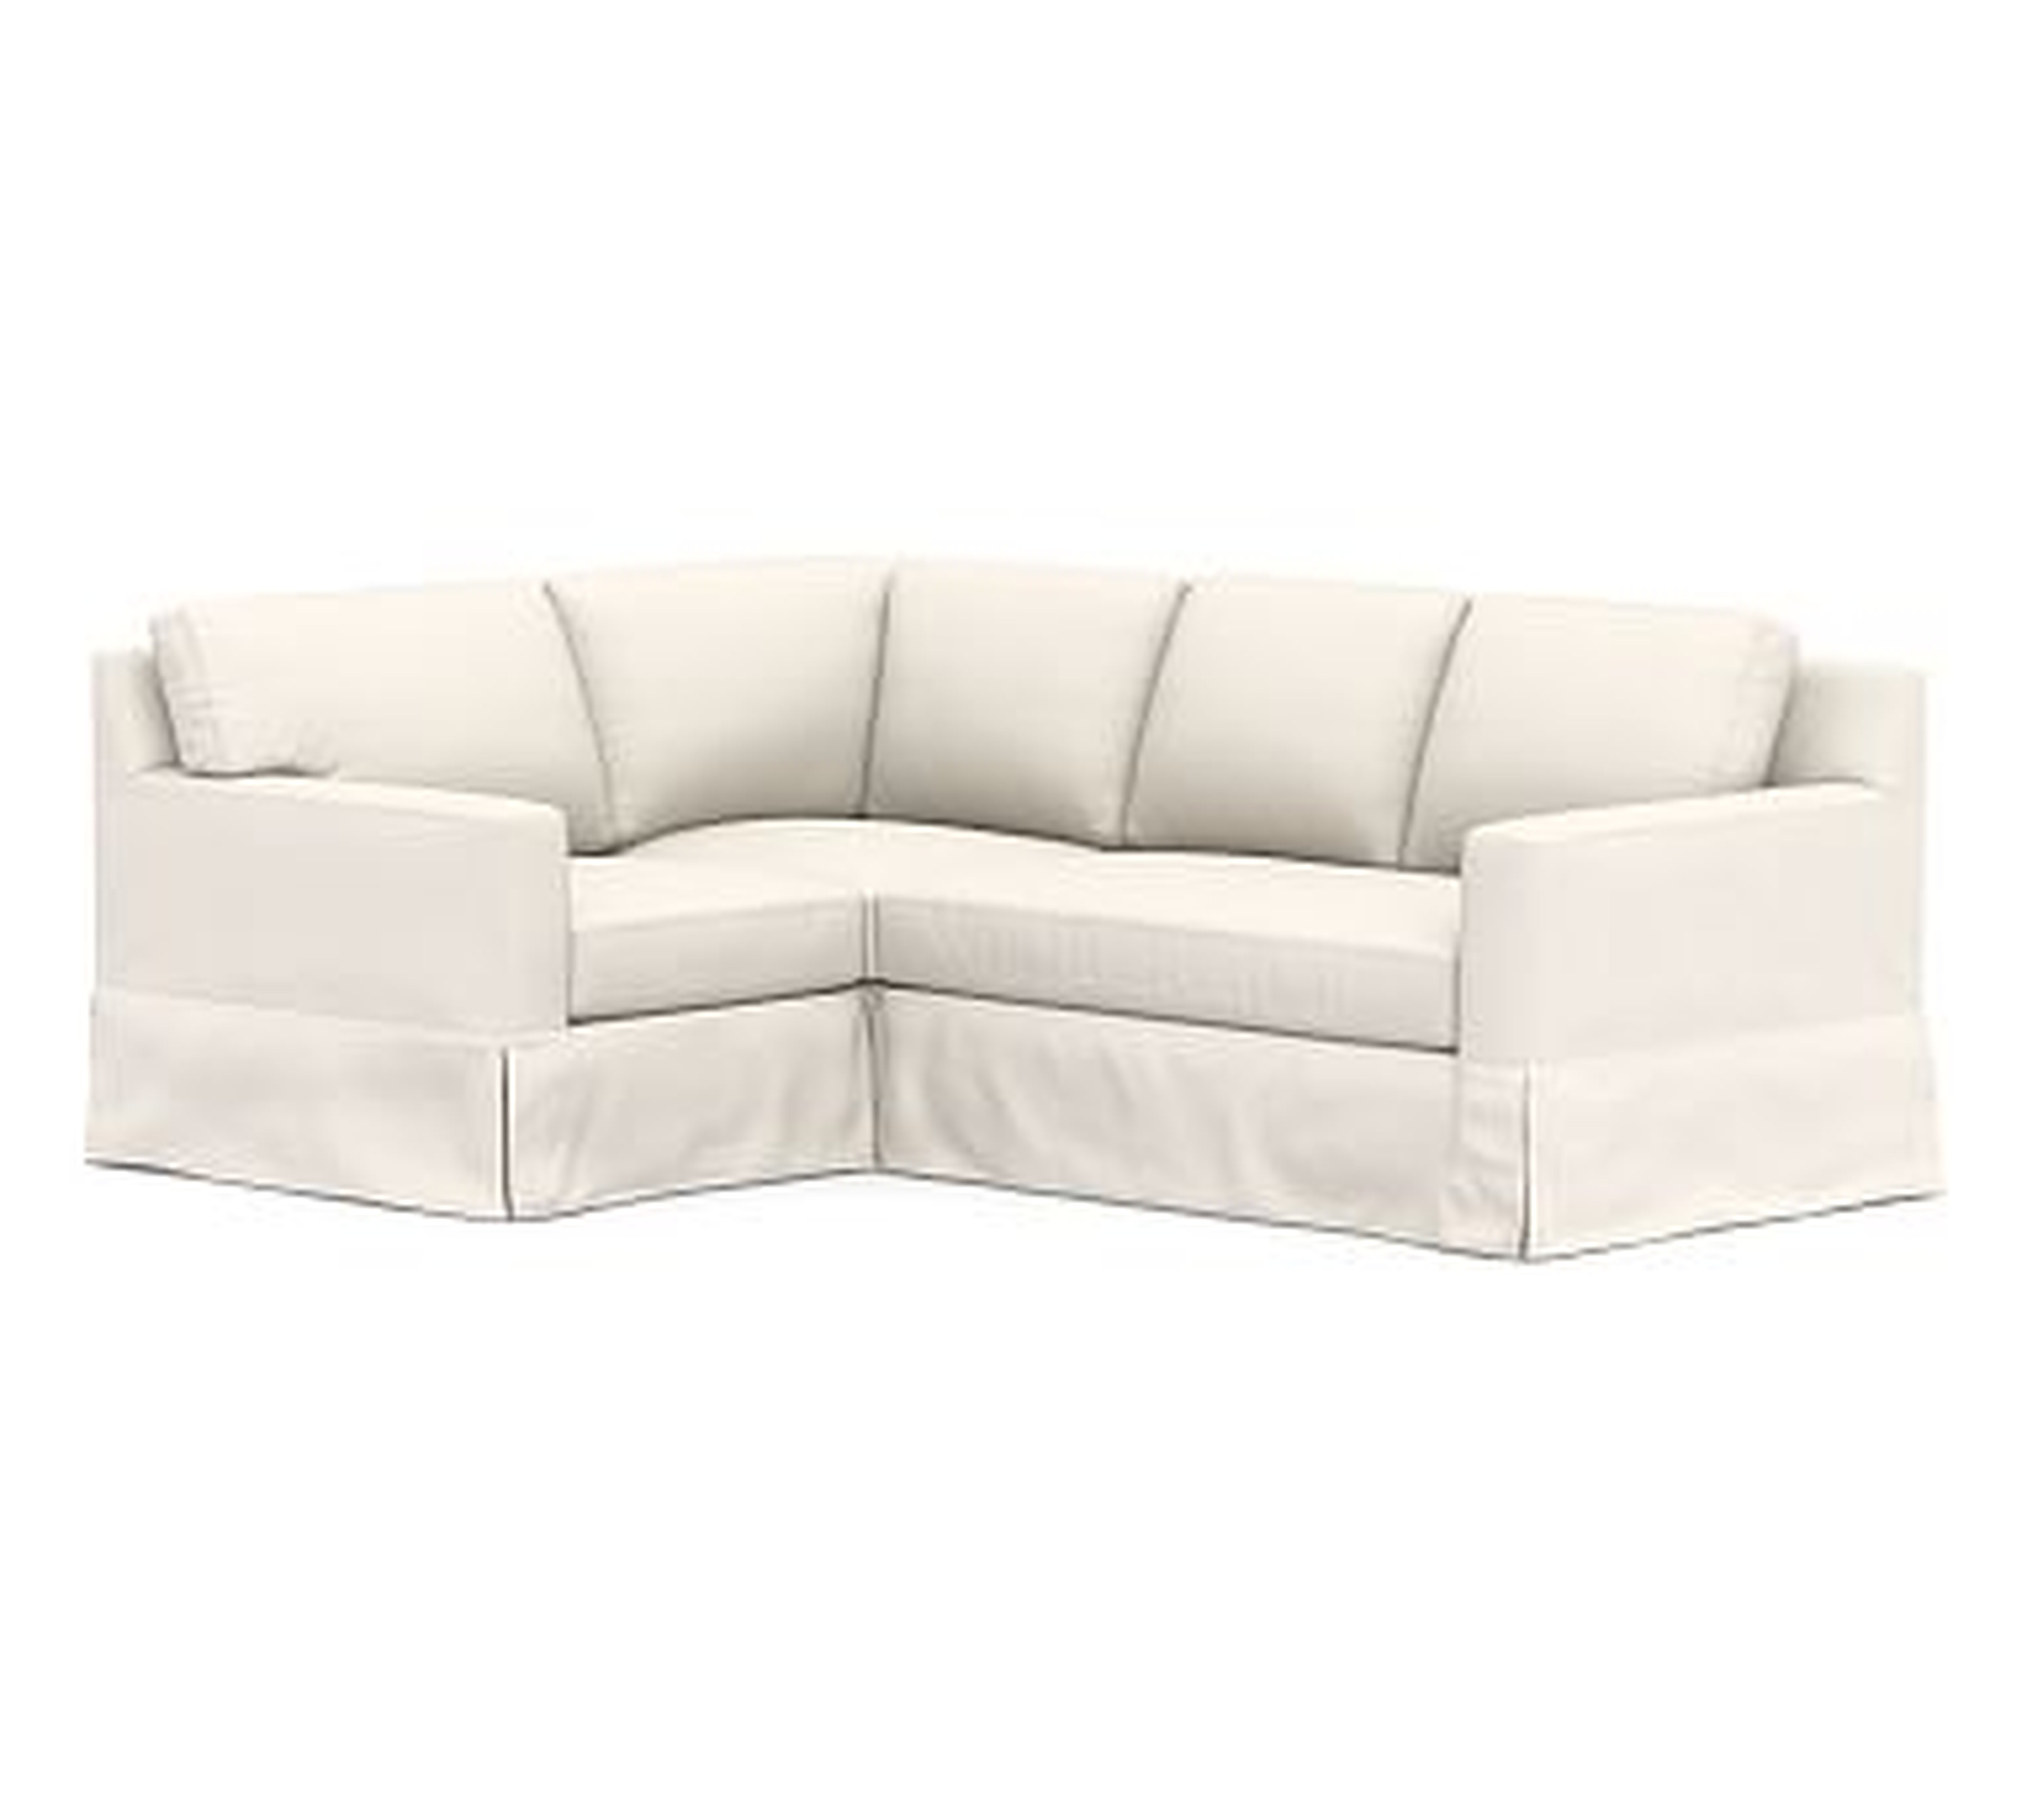 York Square Arm Slipcovered Right Arm 3-Piece Corner Sectional with Bench Cushion, Down Blend Wrapped Cushions, Performance Chateau Basketweave Ivory - Pottery Barn